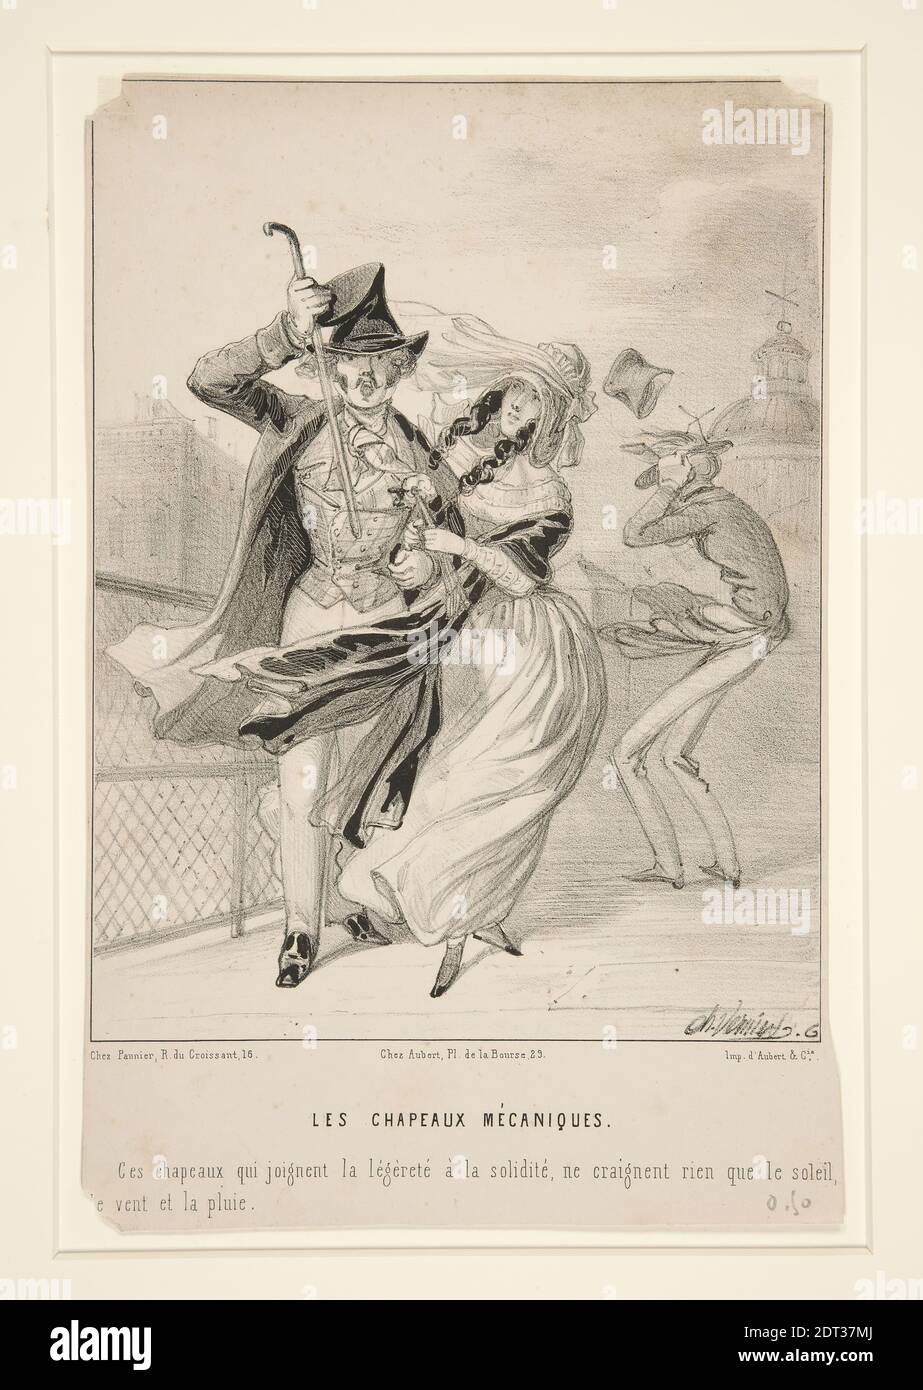 Artist: Charles Vernier, French, 1831–1887, Les Chapeaux Mecaniques, Lithograph, , image: 21.9 × 16.7 cm (8 5/8 × 6 9/16 in.), French, 19th century, Works on Paper - Prints Stock Photo